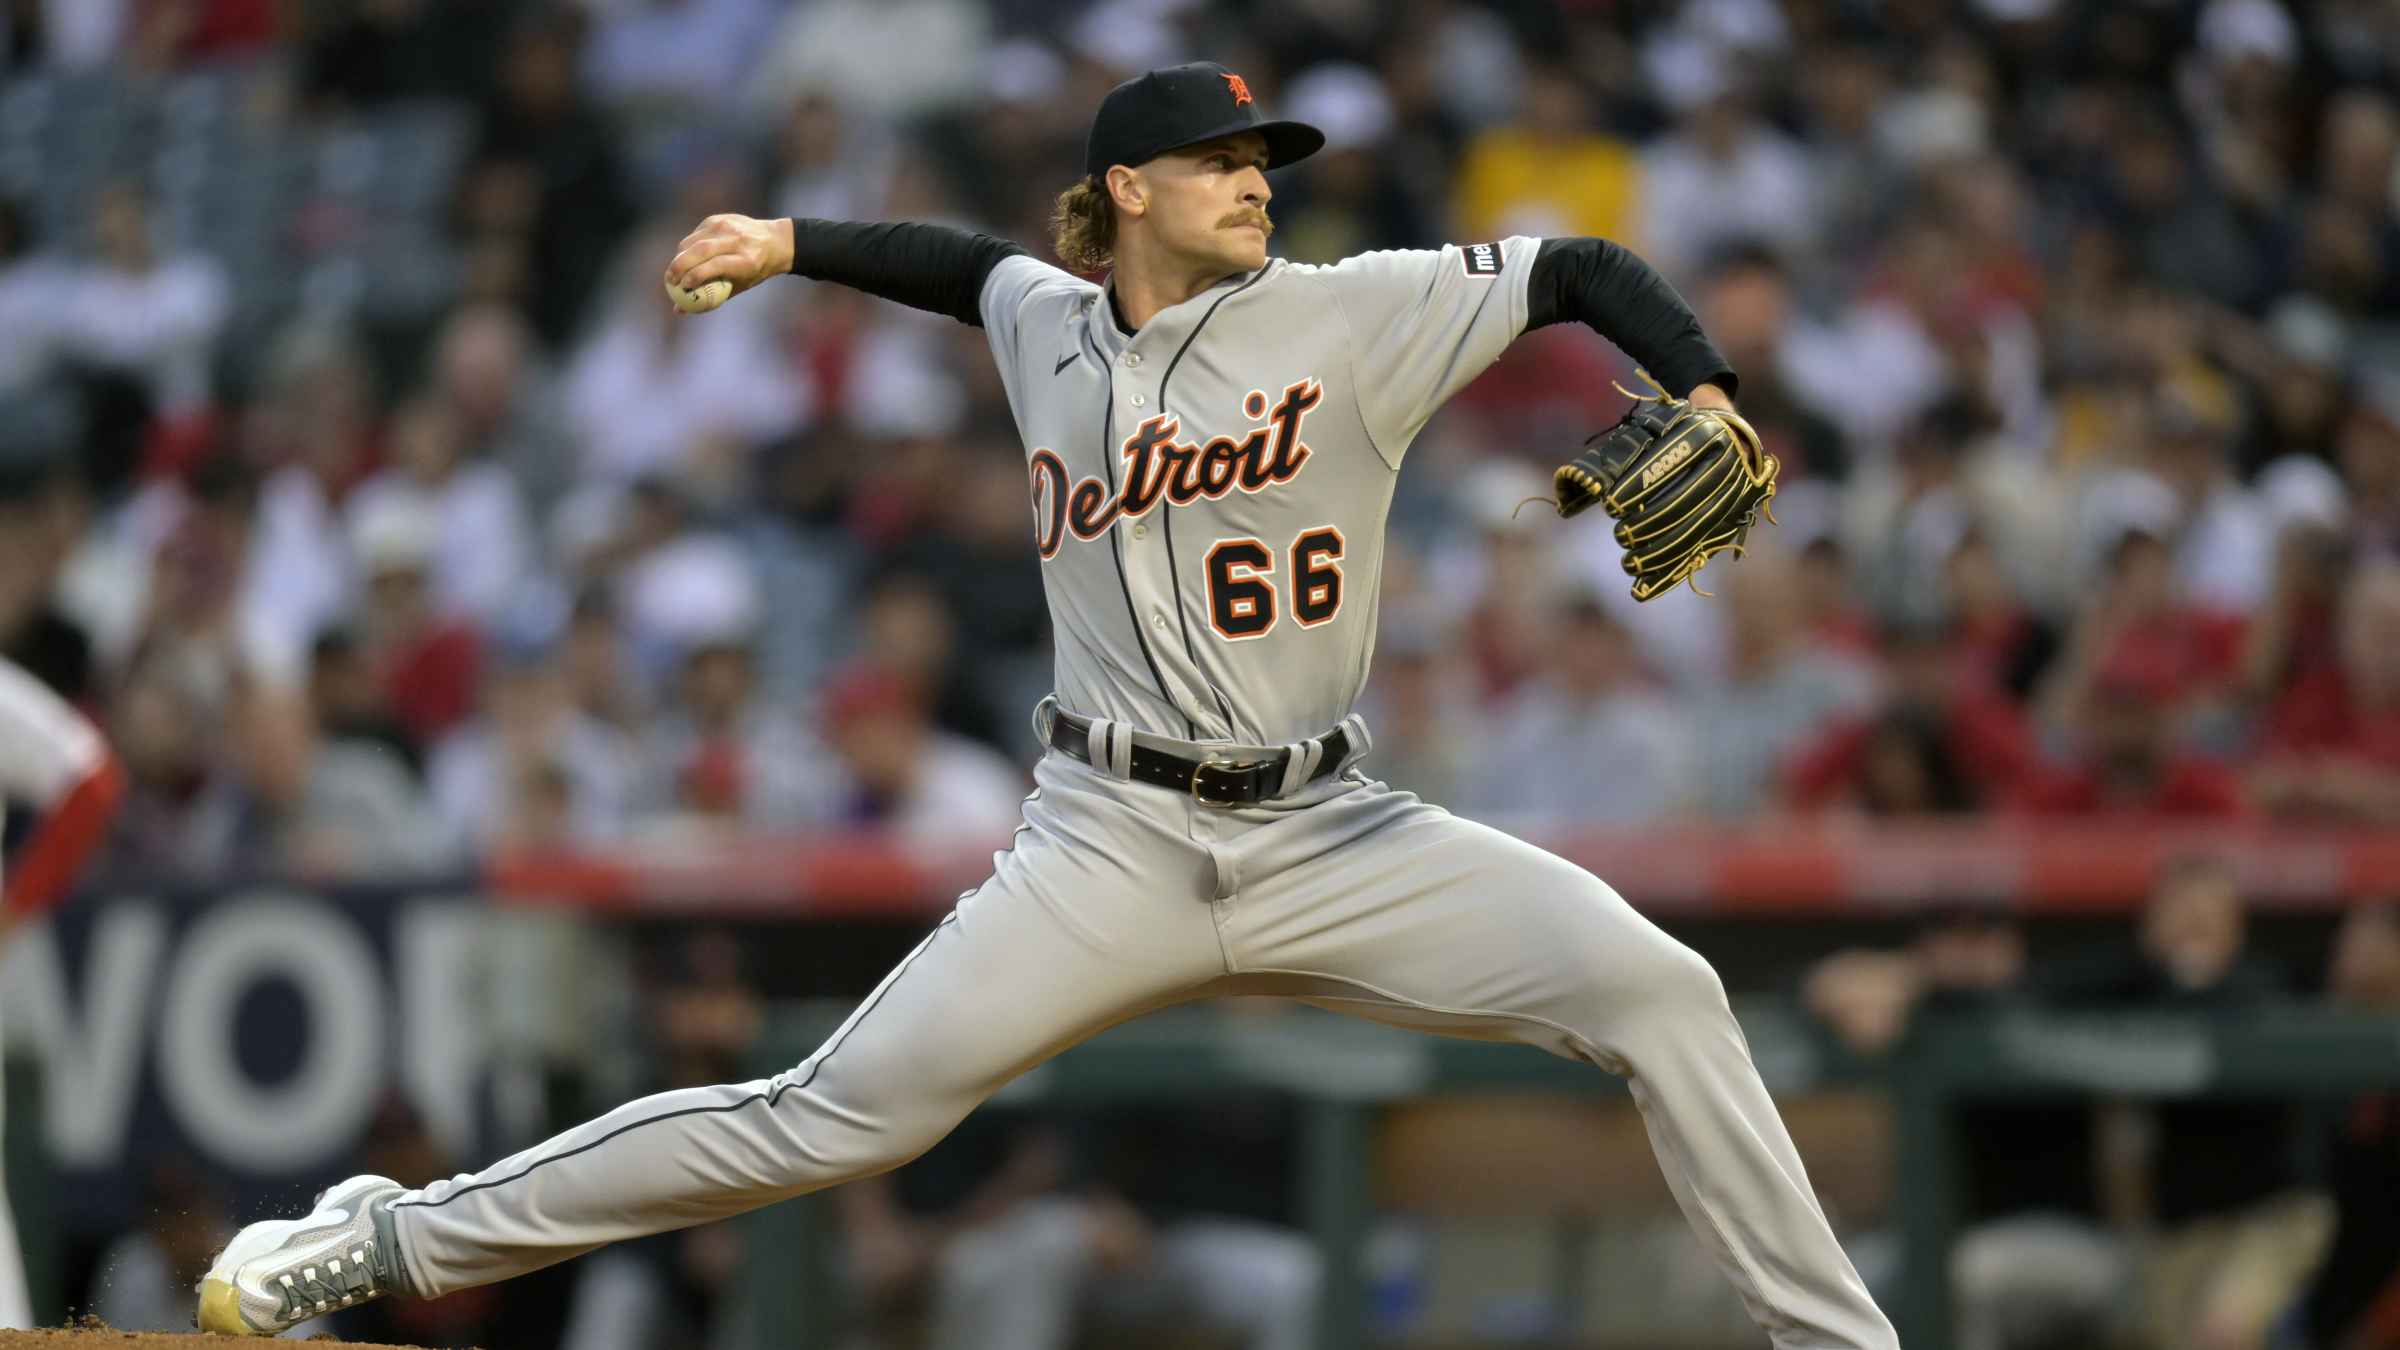 Tigers blog: Despite bullpen, late-game heroics power Tigers victory